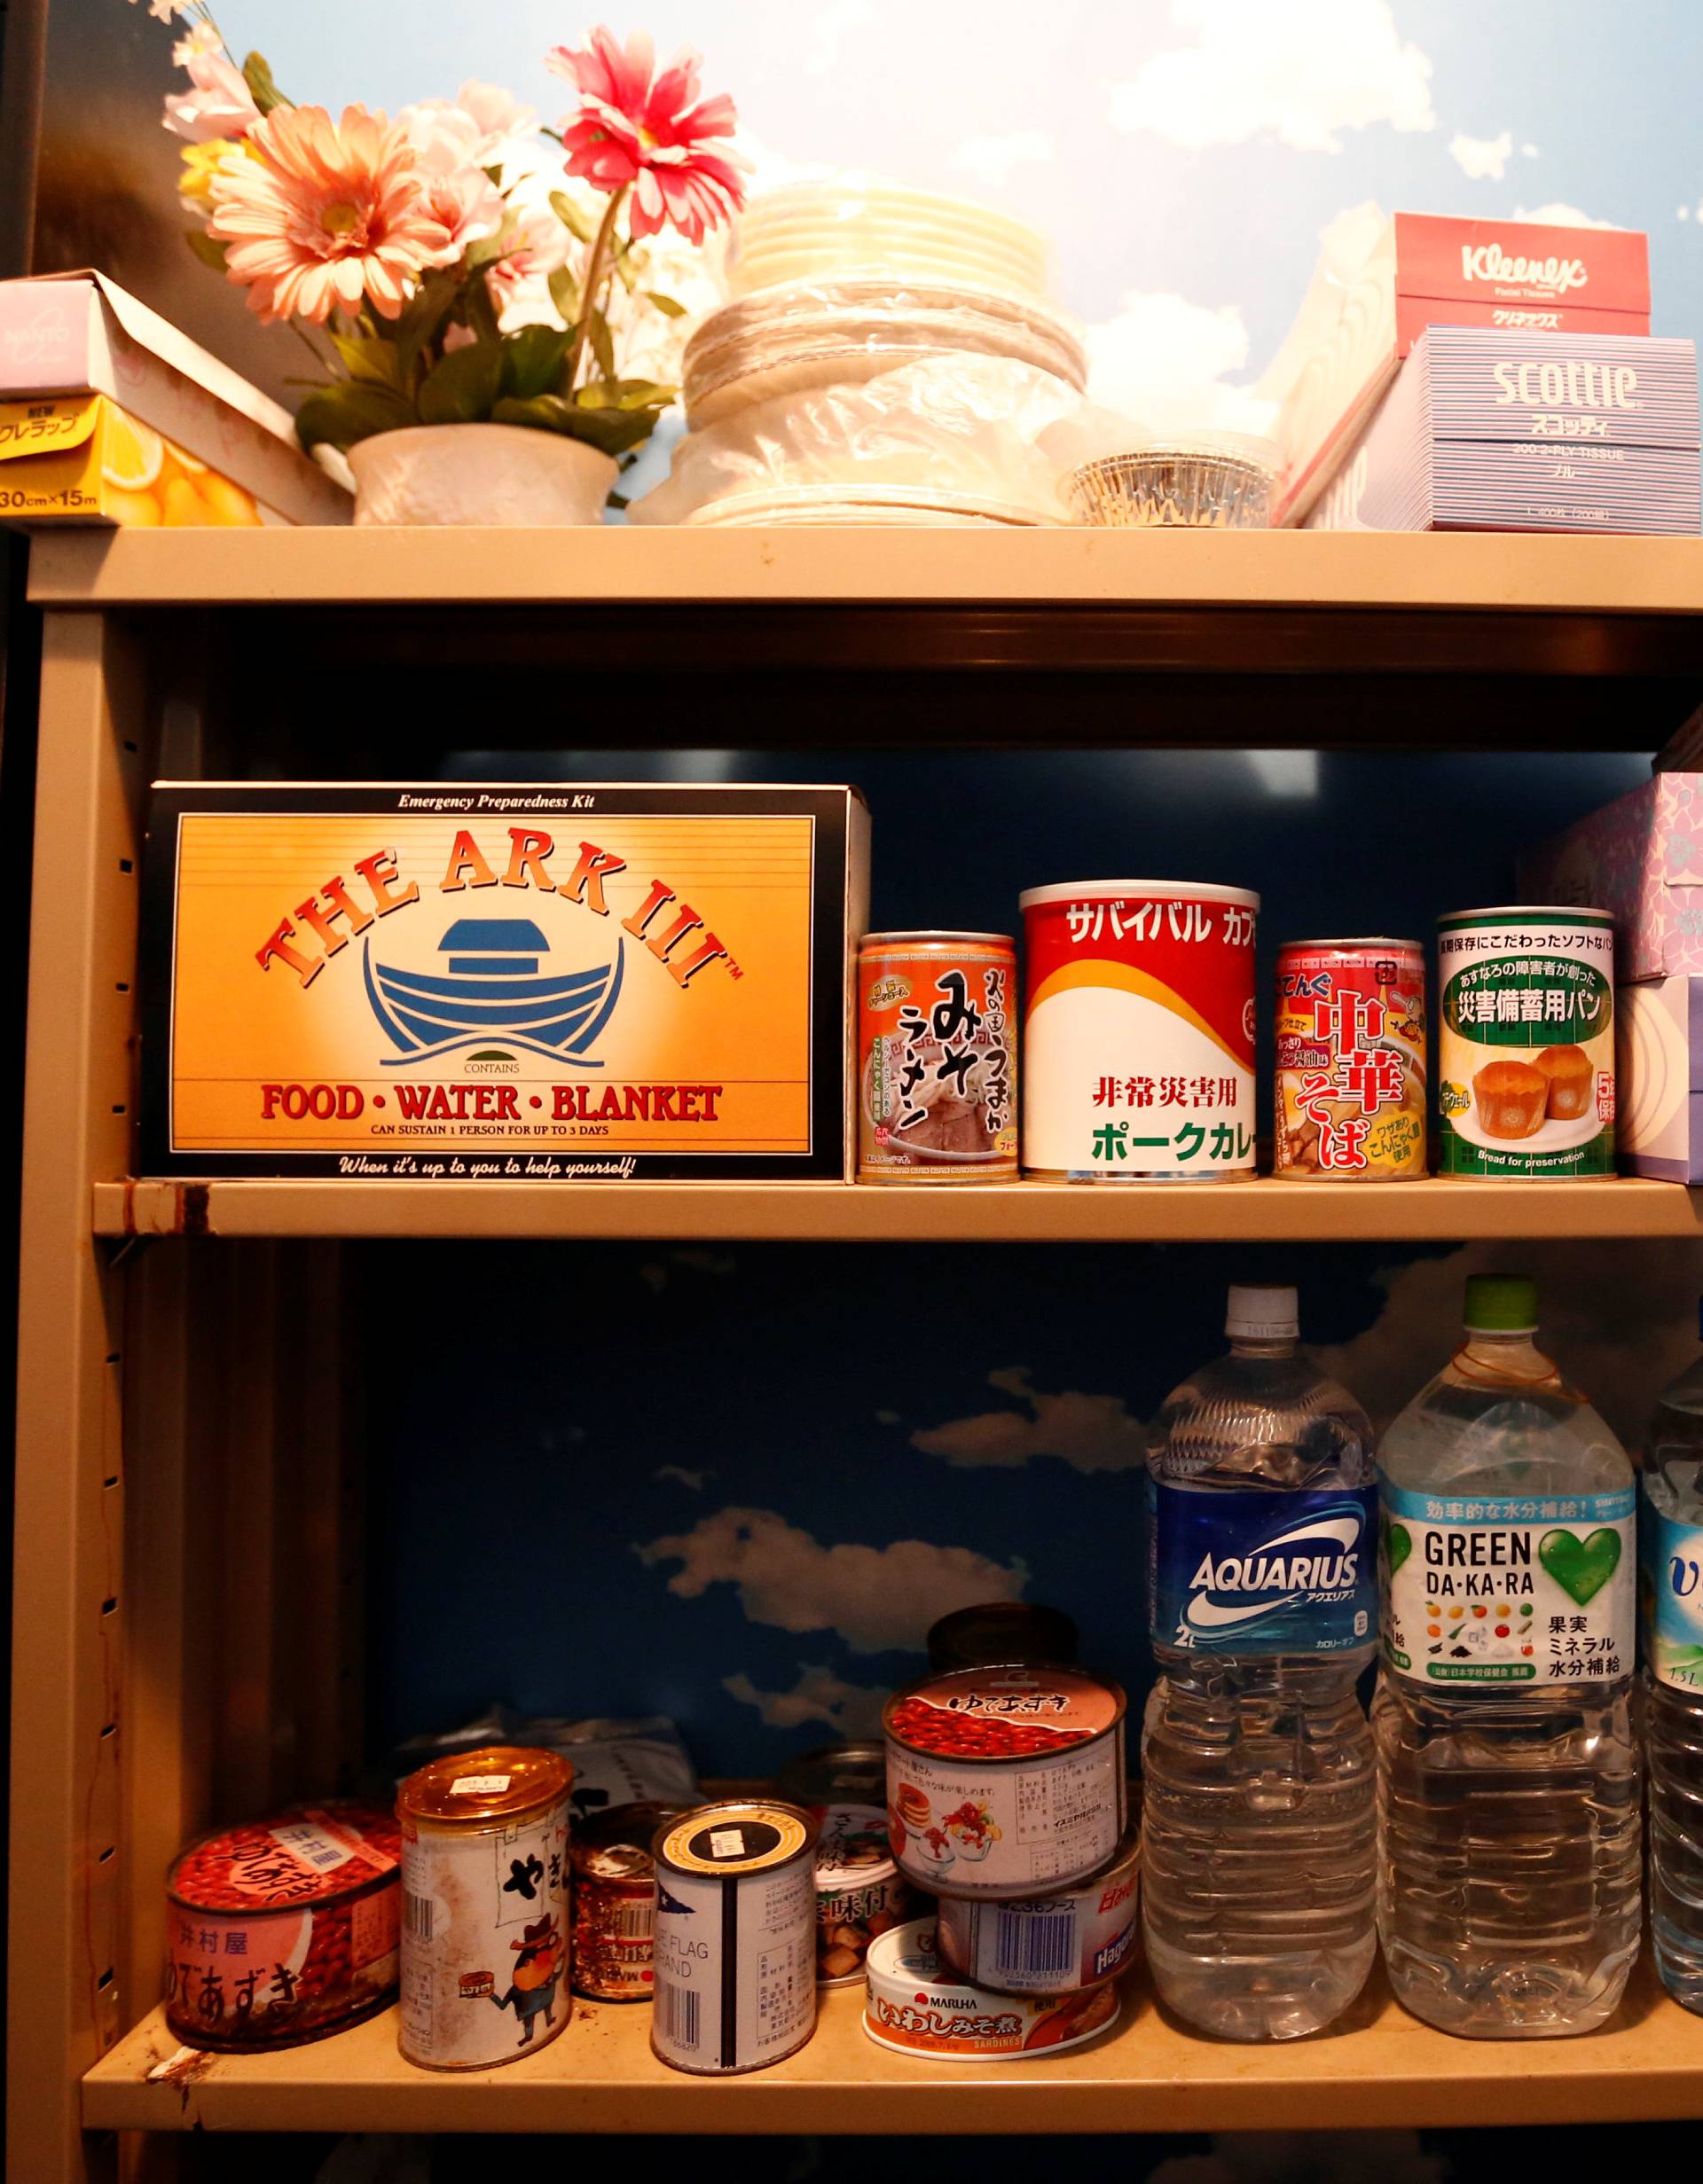 Emergency foods are seen in the model room of Shelter Co.'s nuclear shelter in the basement of its CEO Seiichiro Nishimoto's house in Osaka